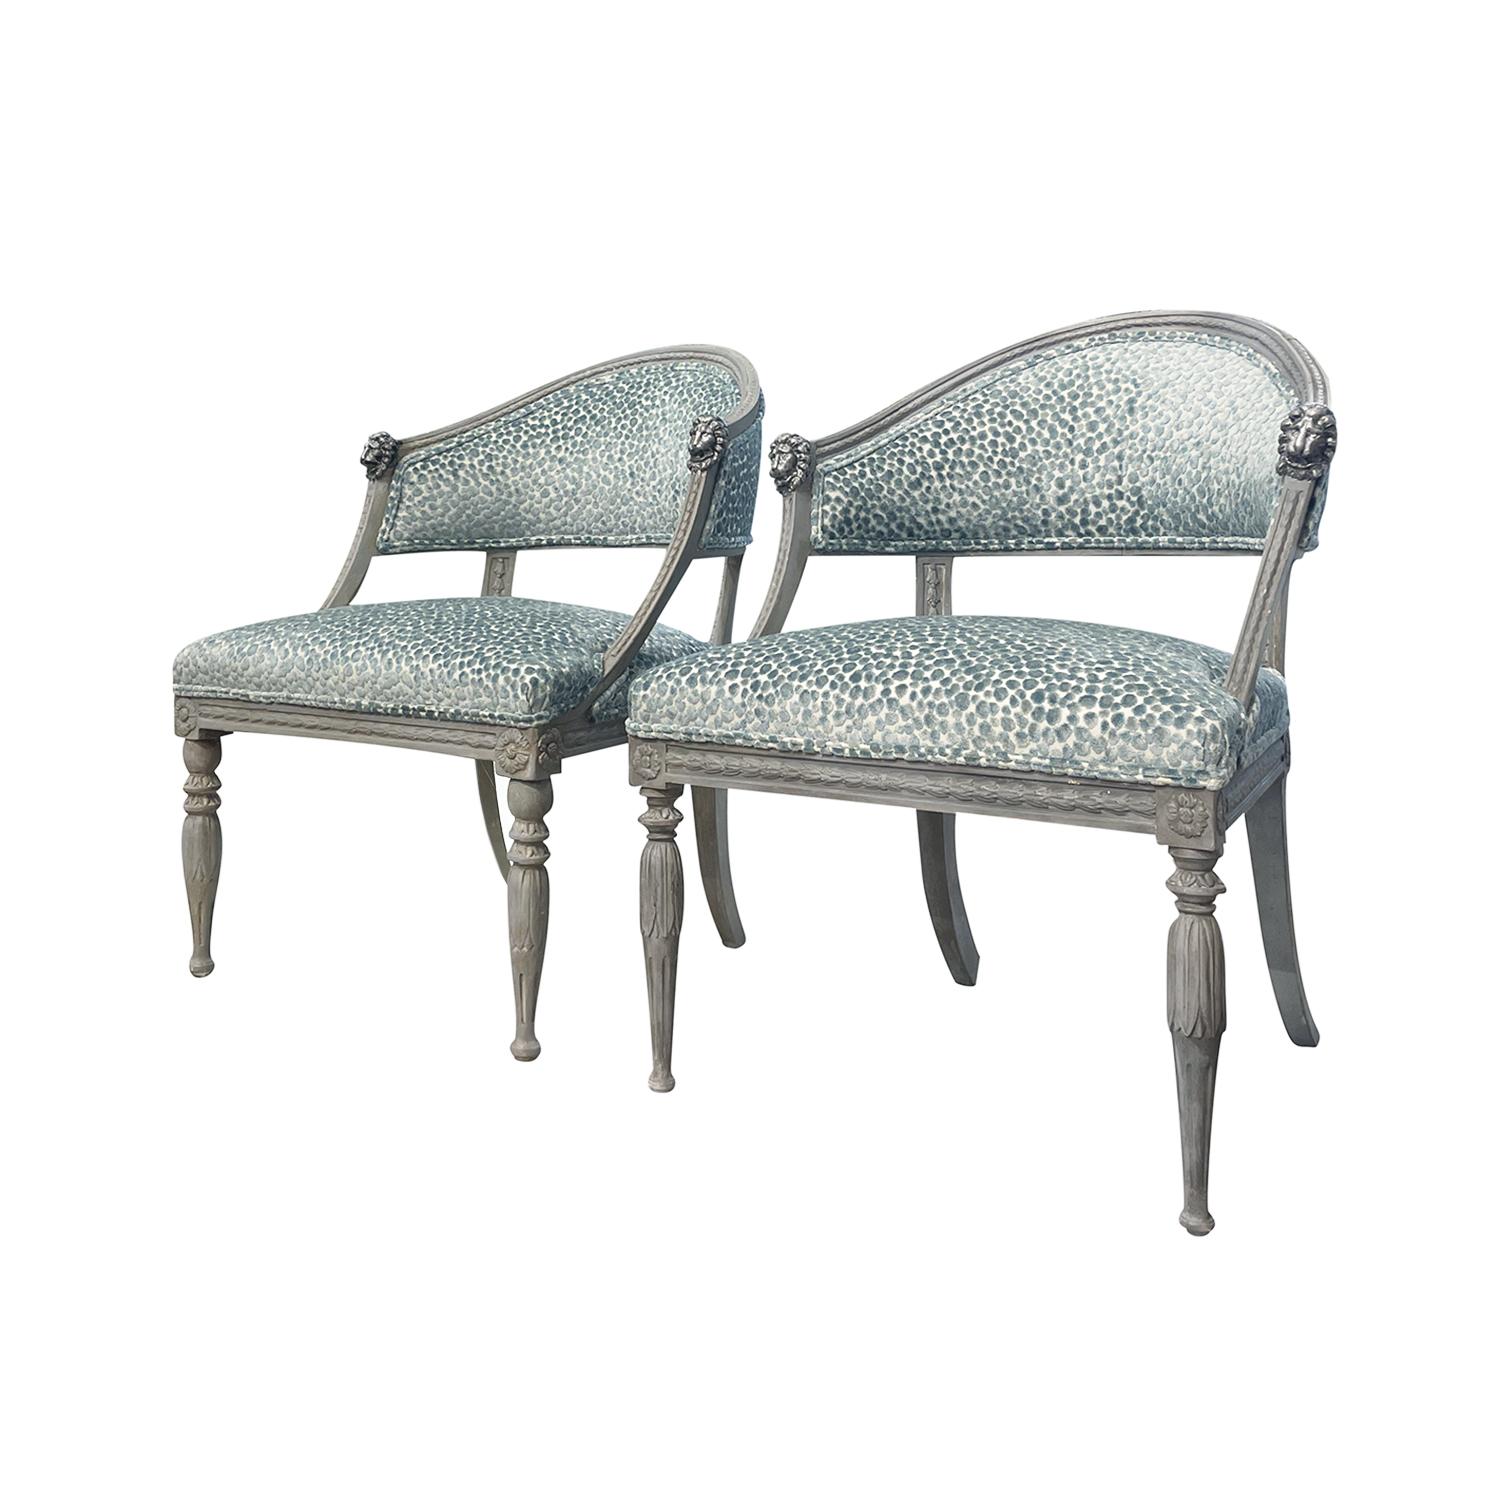 19th Century Set of Swedish Gustavian Armchairs Attributed to Ephraim Ståhl In Good Condition For Sale In West Palm Beach, FL